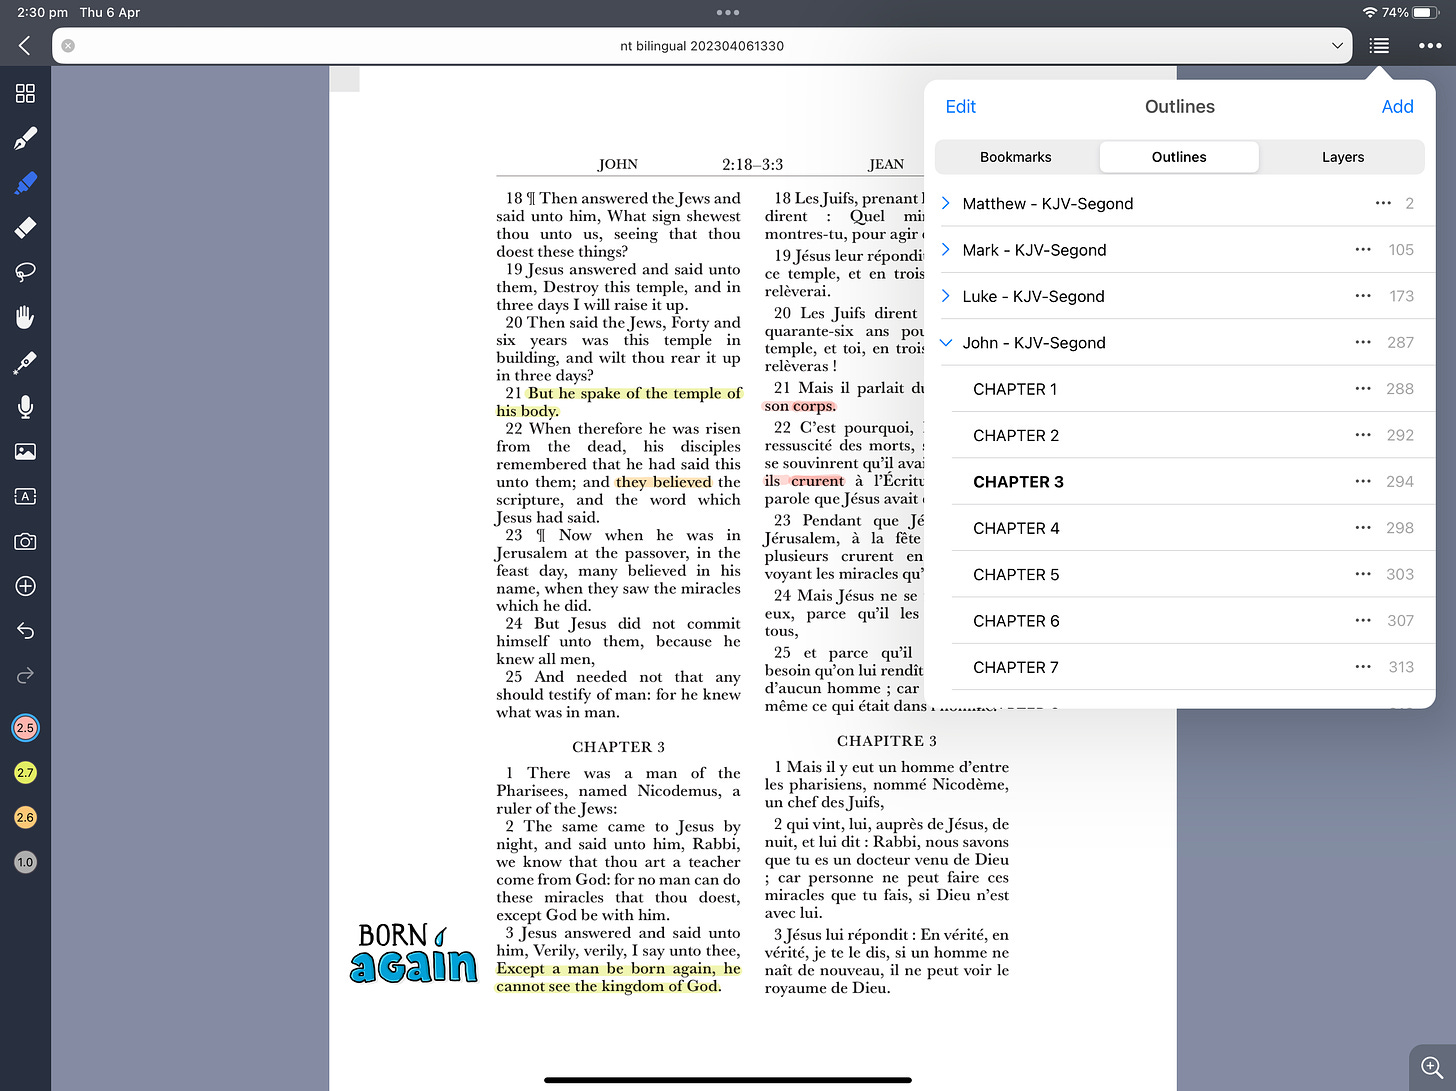 Screenshot of iPad screen showing a page of the Bible with two columns; one in English, the other in French. There's a dropdown menu showing navigation links to specific chapters.